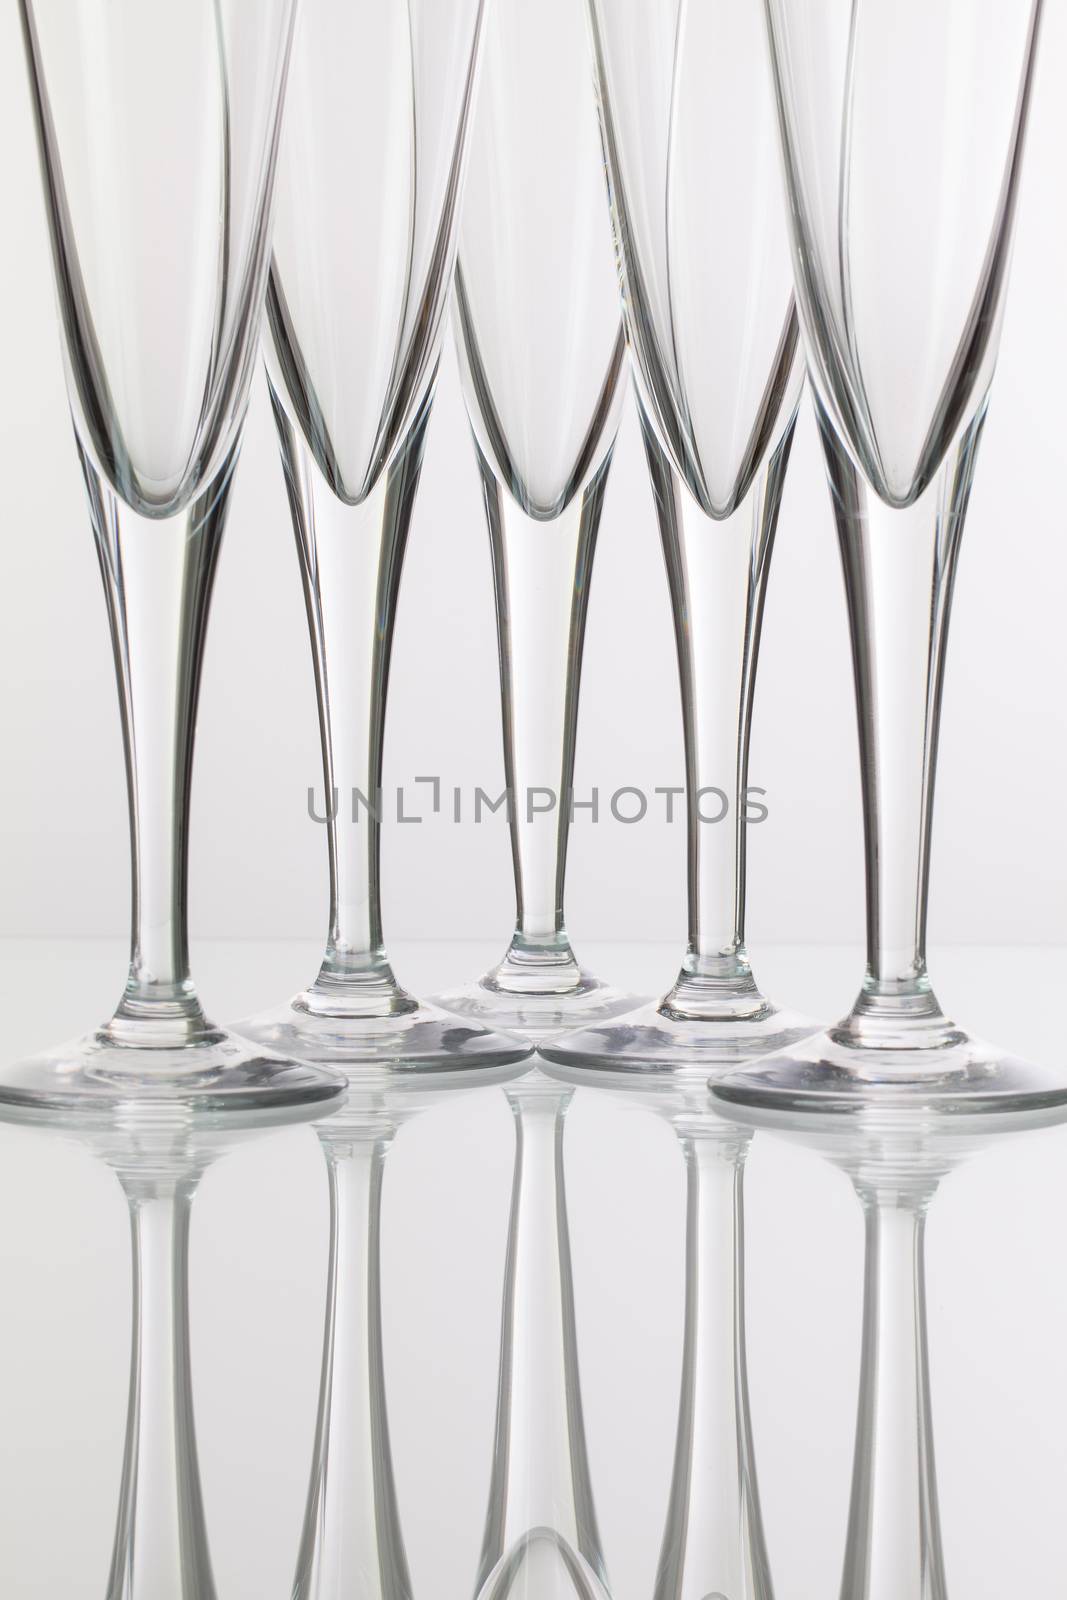 Five champagne glasses on a glass plate